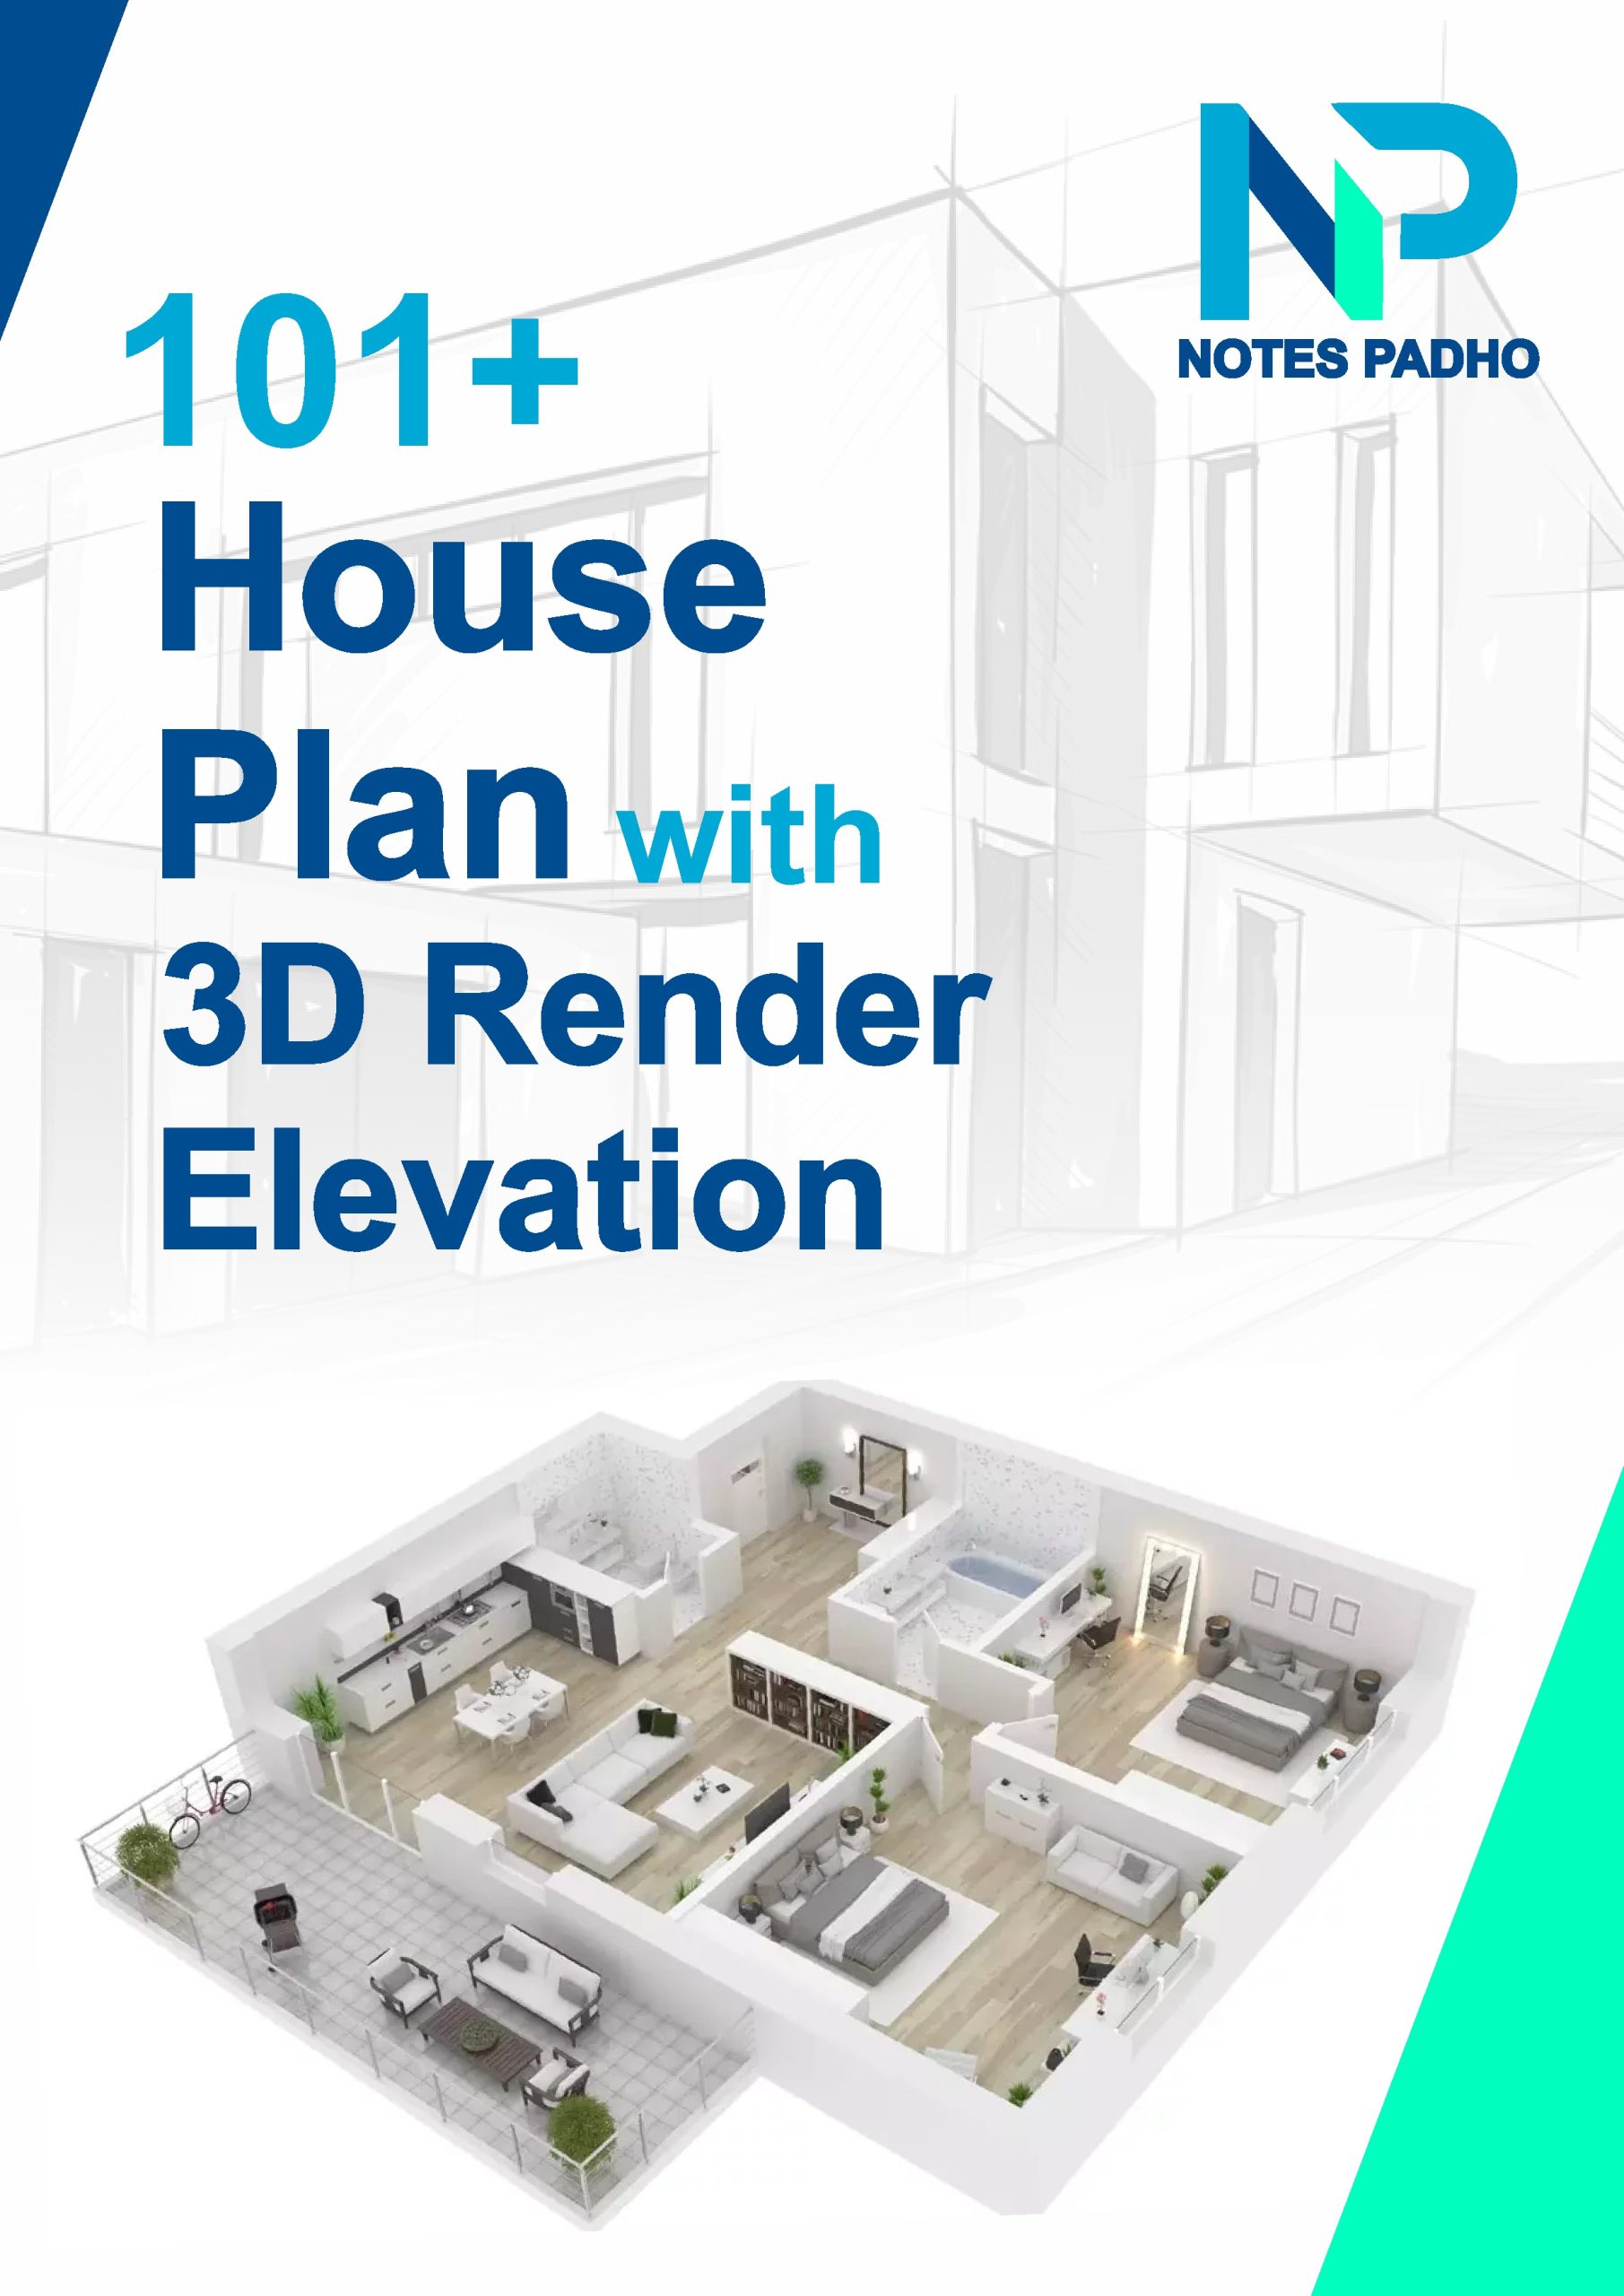 How to Create a Floor Plan Design with Cutting-Edge 3D Technology - HomeByMe